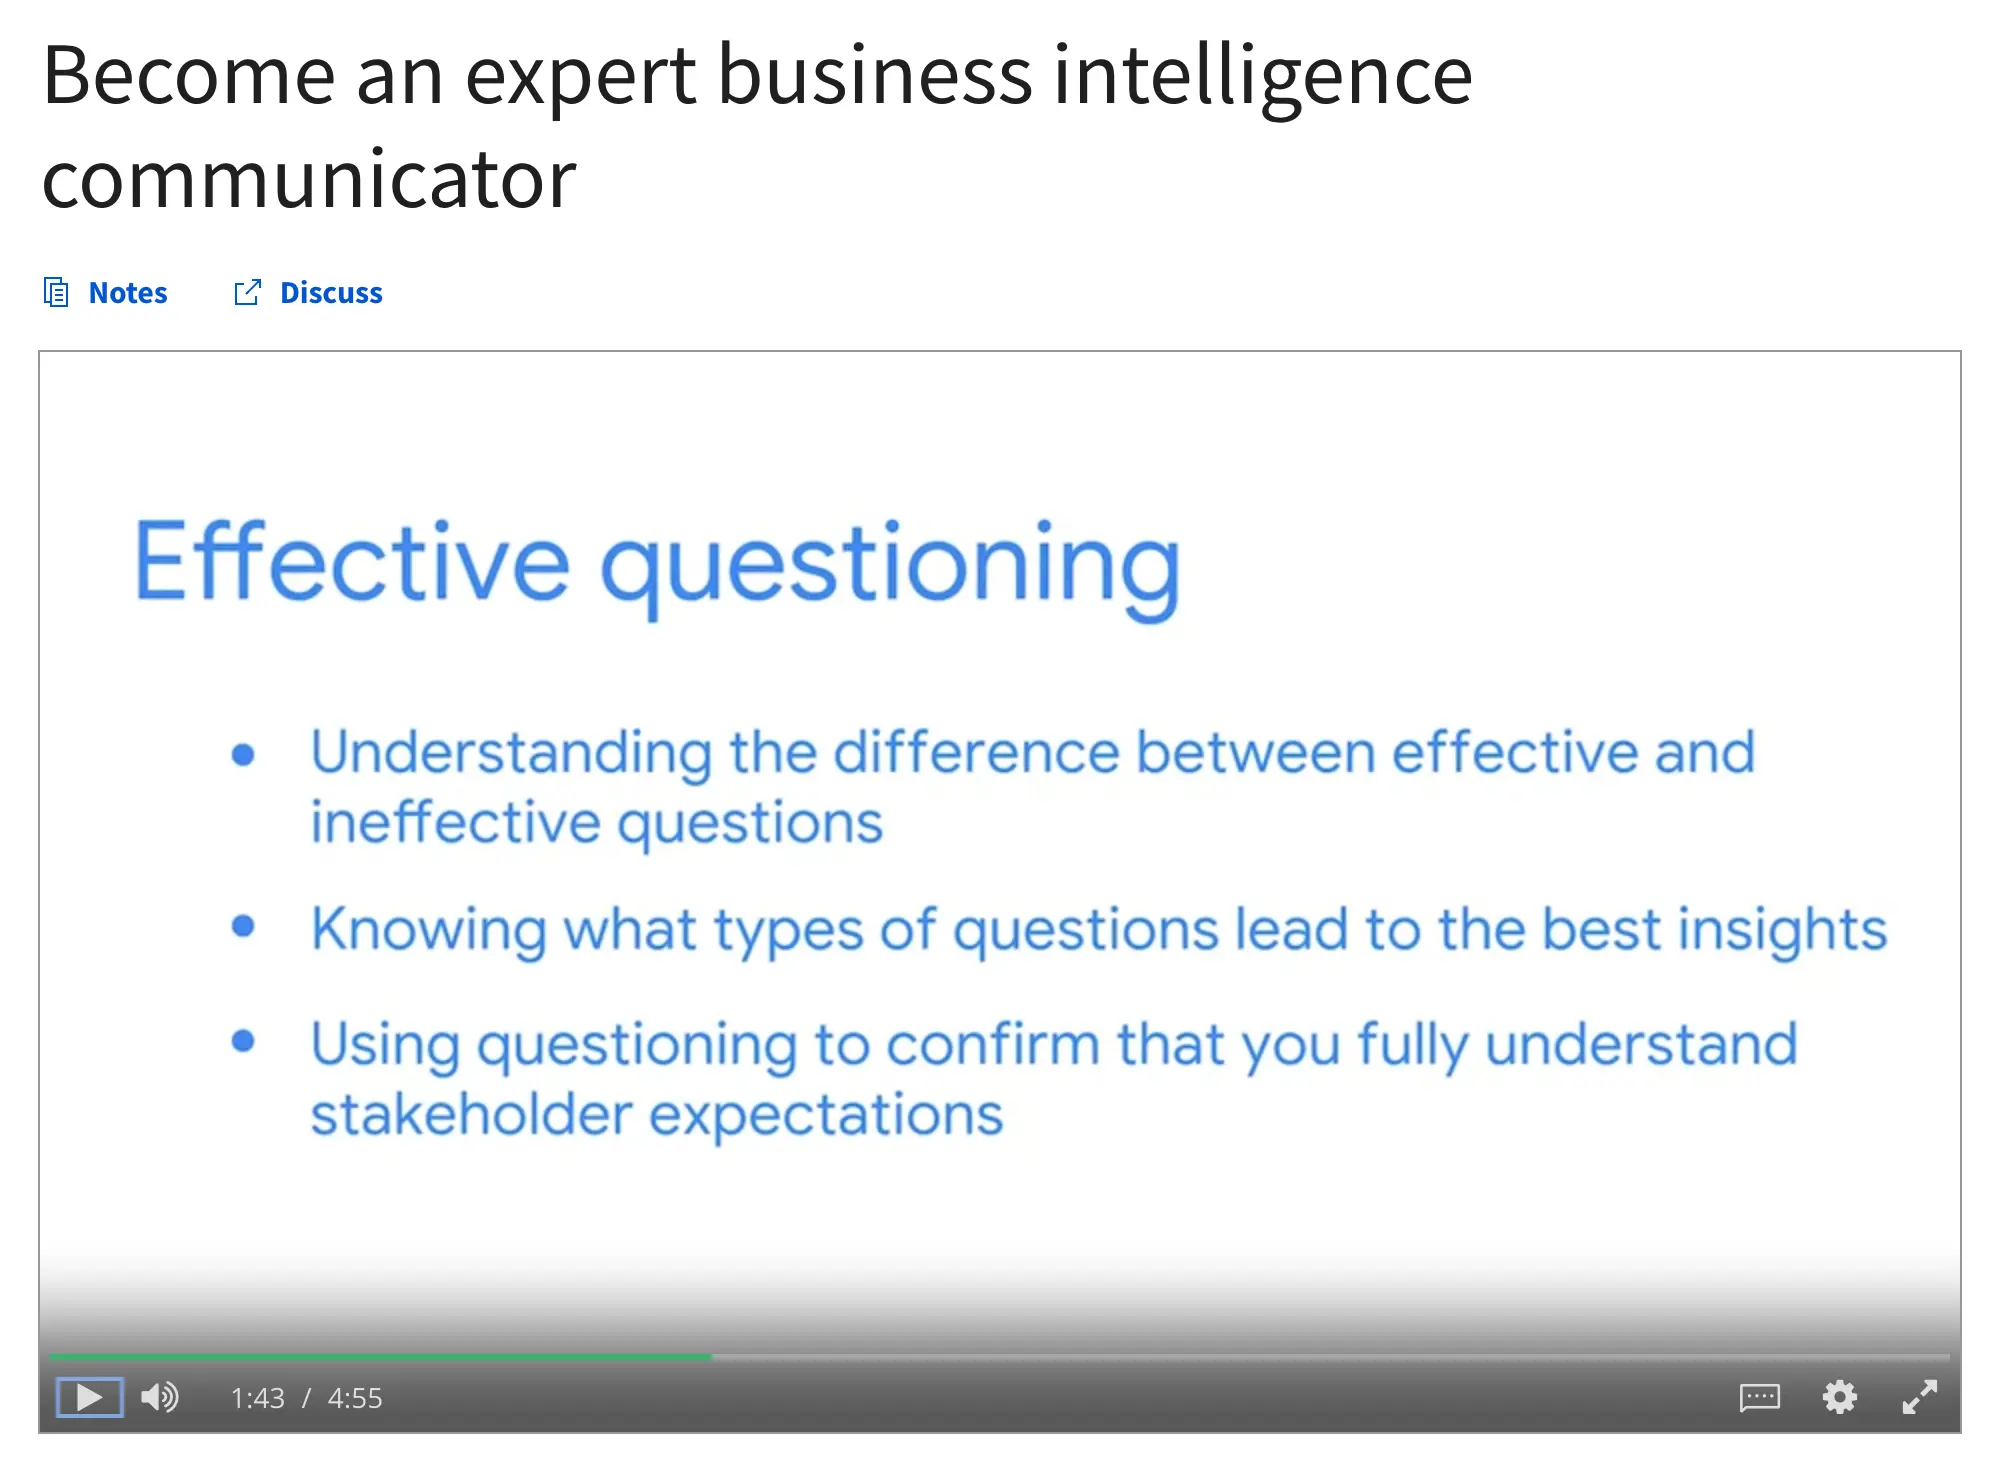 Foundations of Business Intelligence Course Week 2